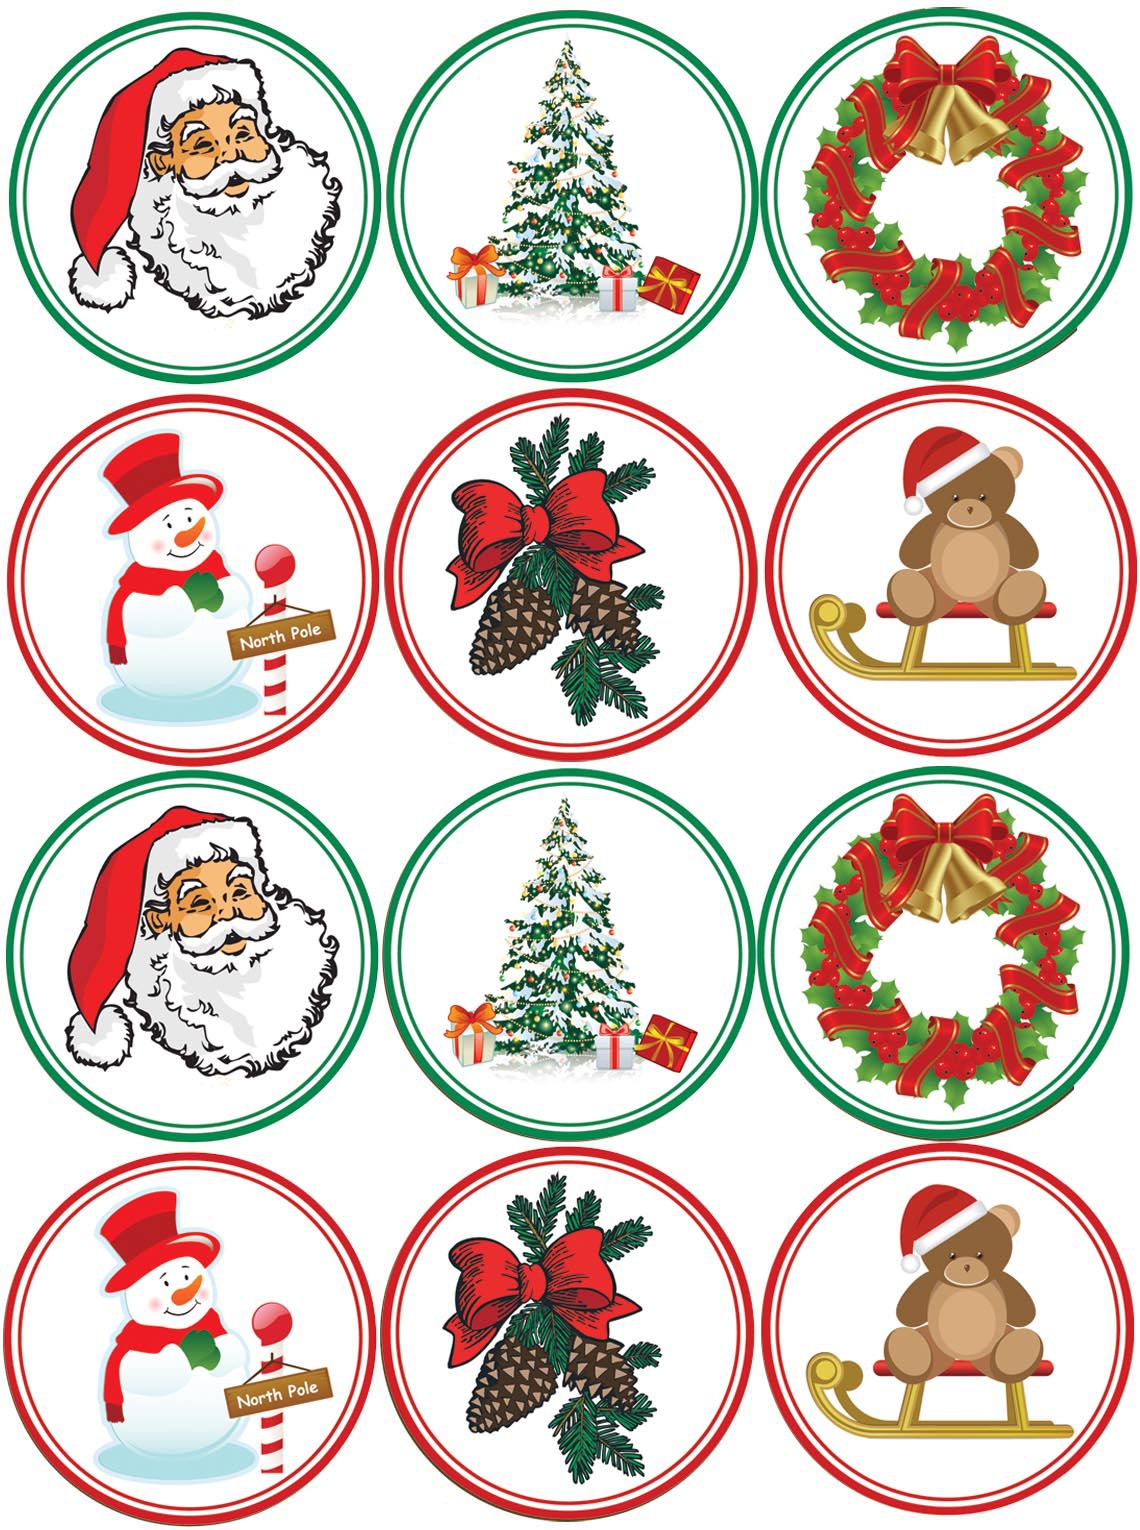 How To Decorate Christmas Cupcakes - ClipArt Best - ClipArt Best